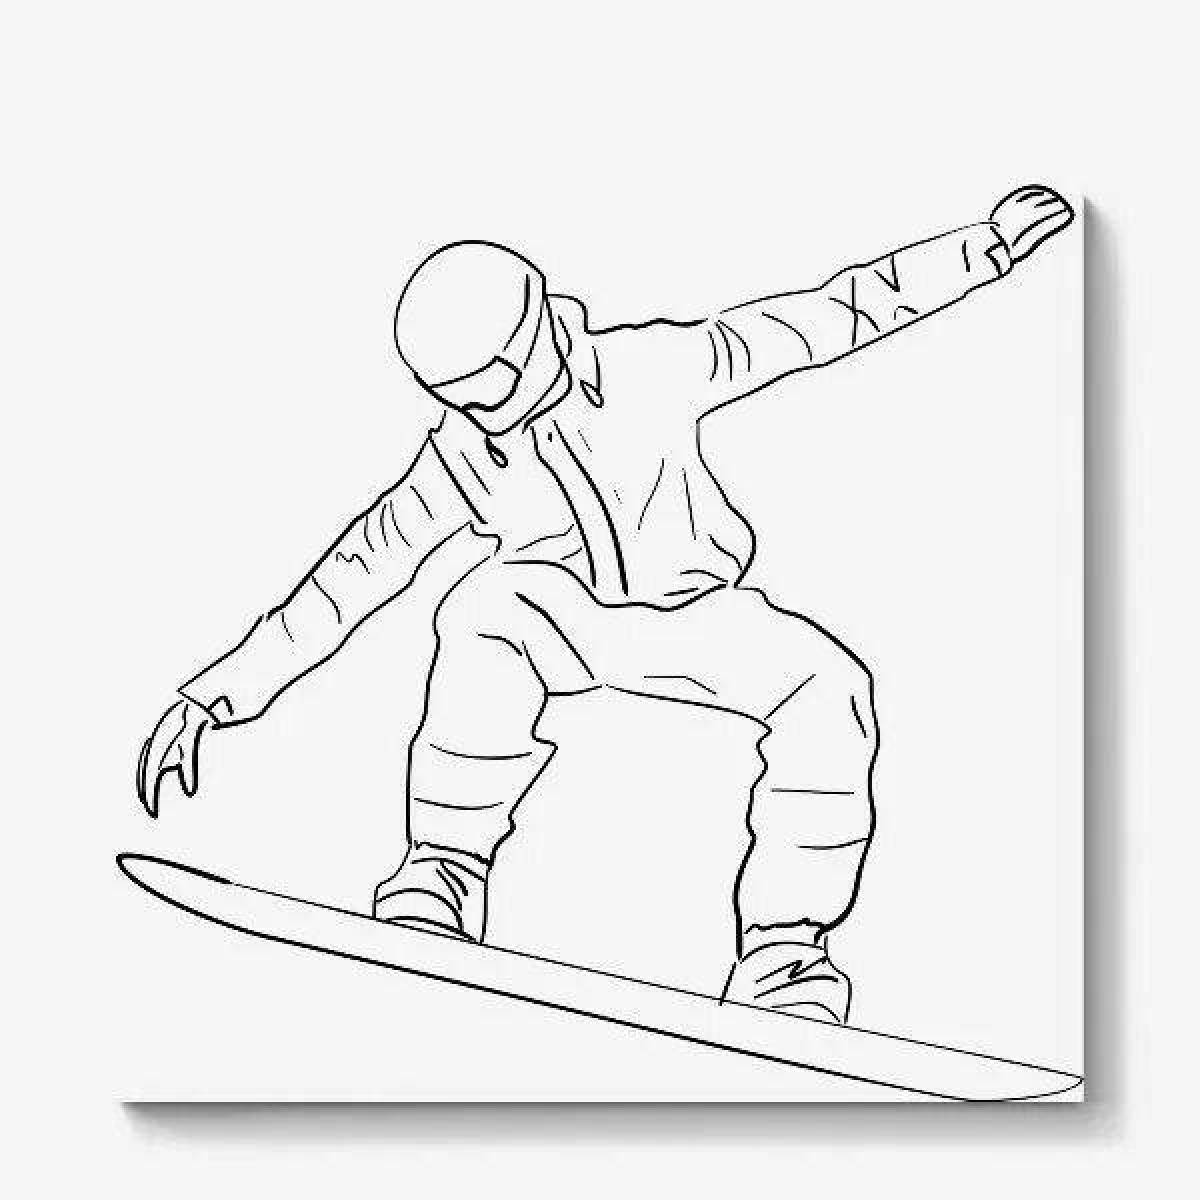 Rough snowboard coloring page